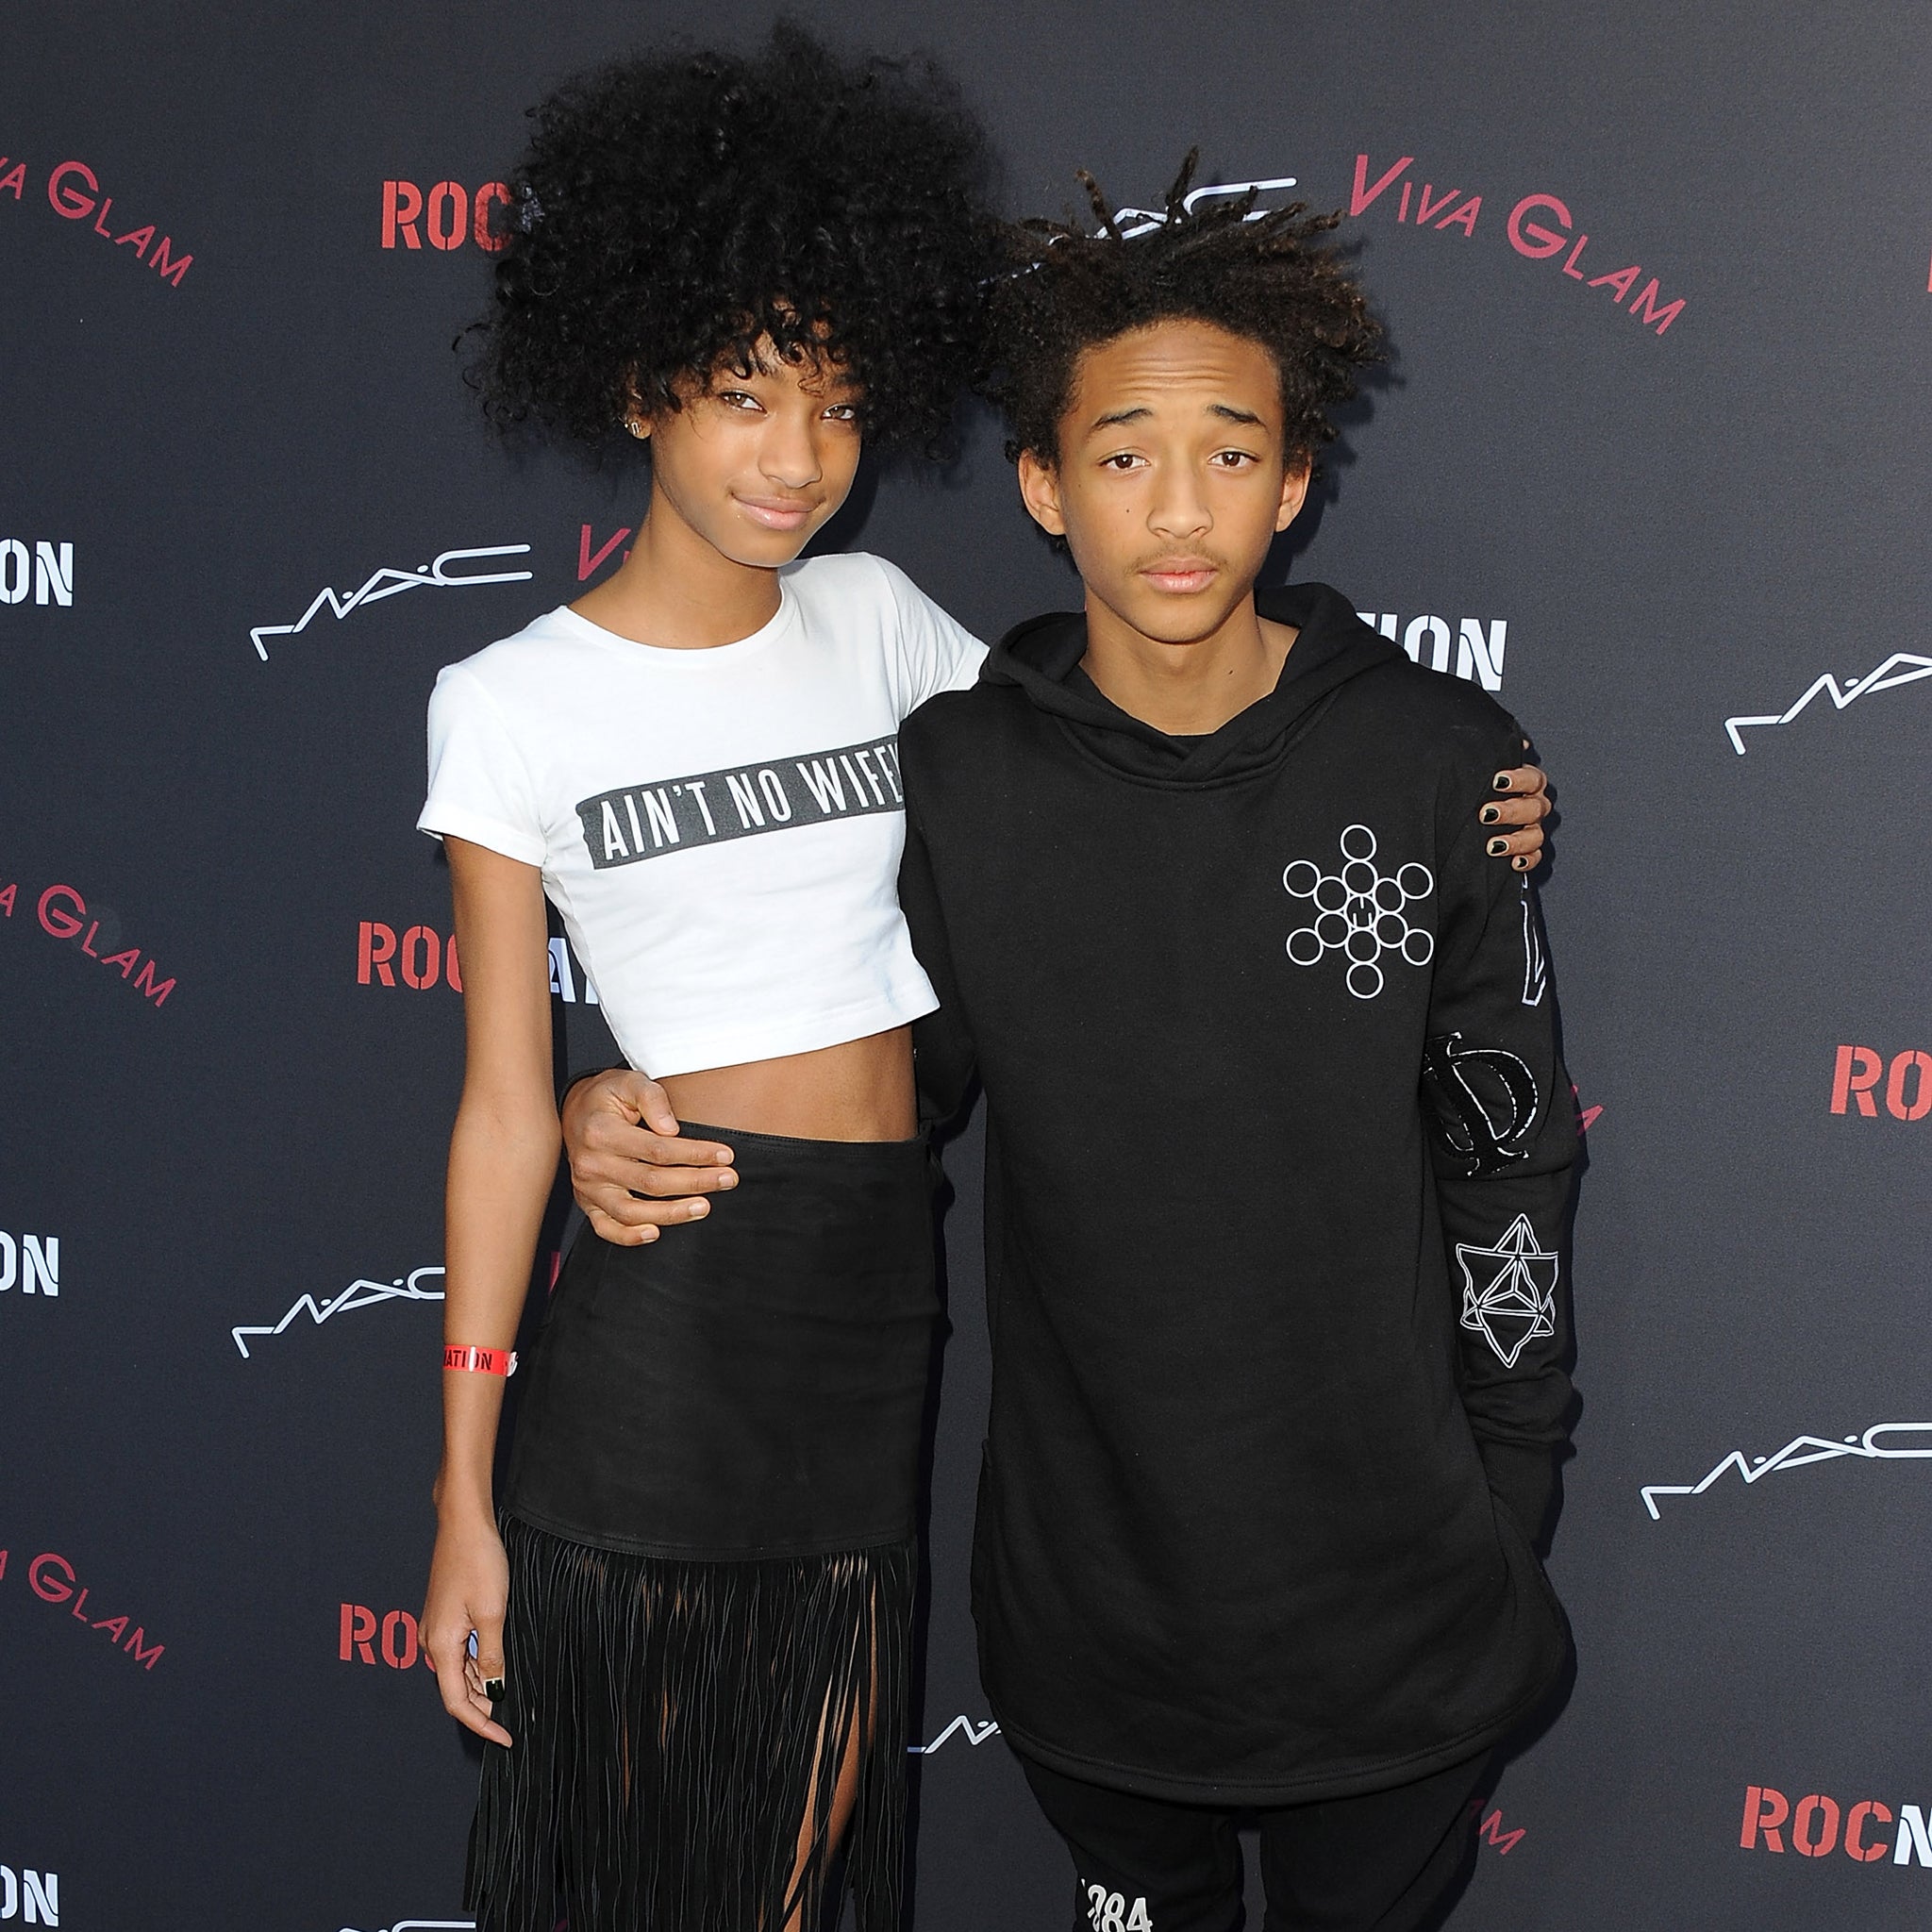 Too cool for school: Willow and Jaden Smith